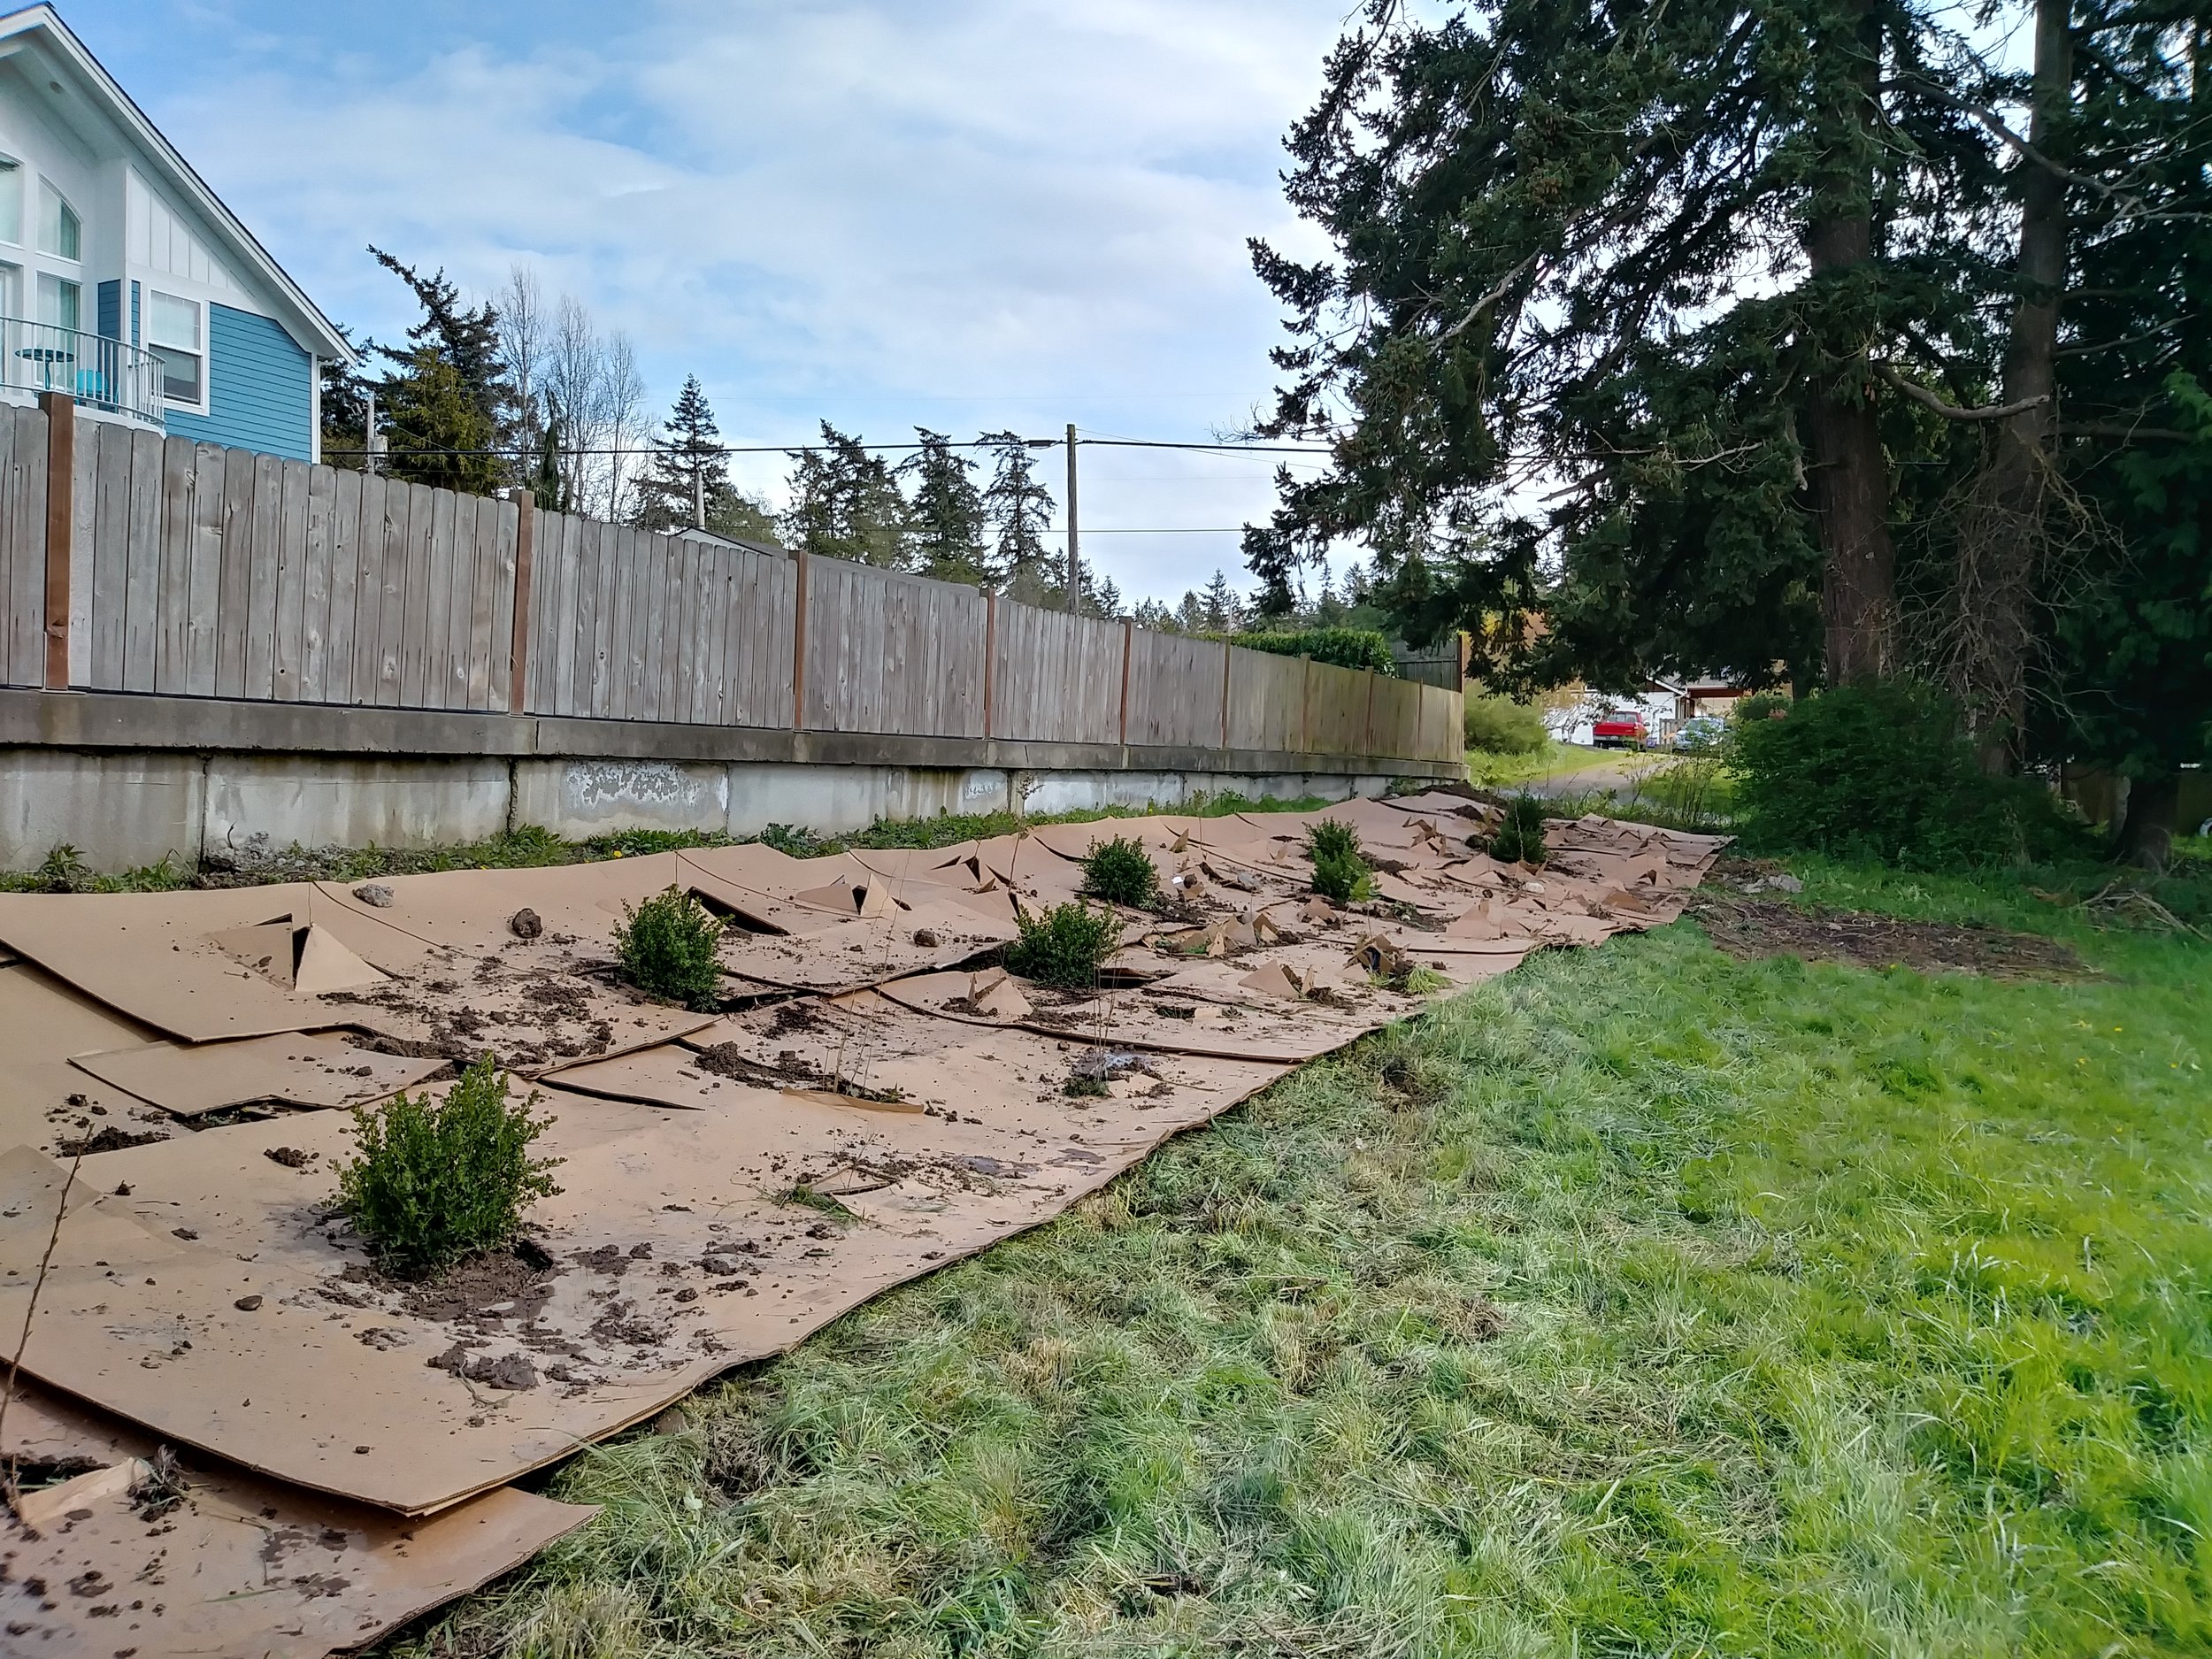 MID-WAY: Cardboard is used to cover the weeds. It will eventually break down and become part of the soil landscape.